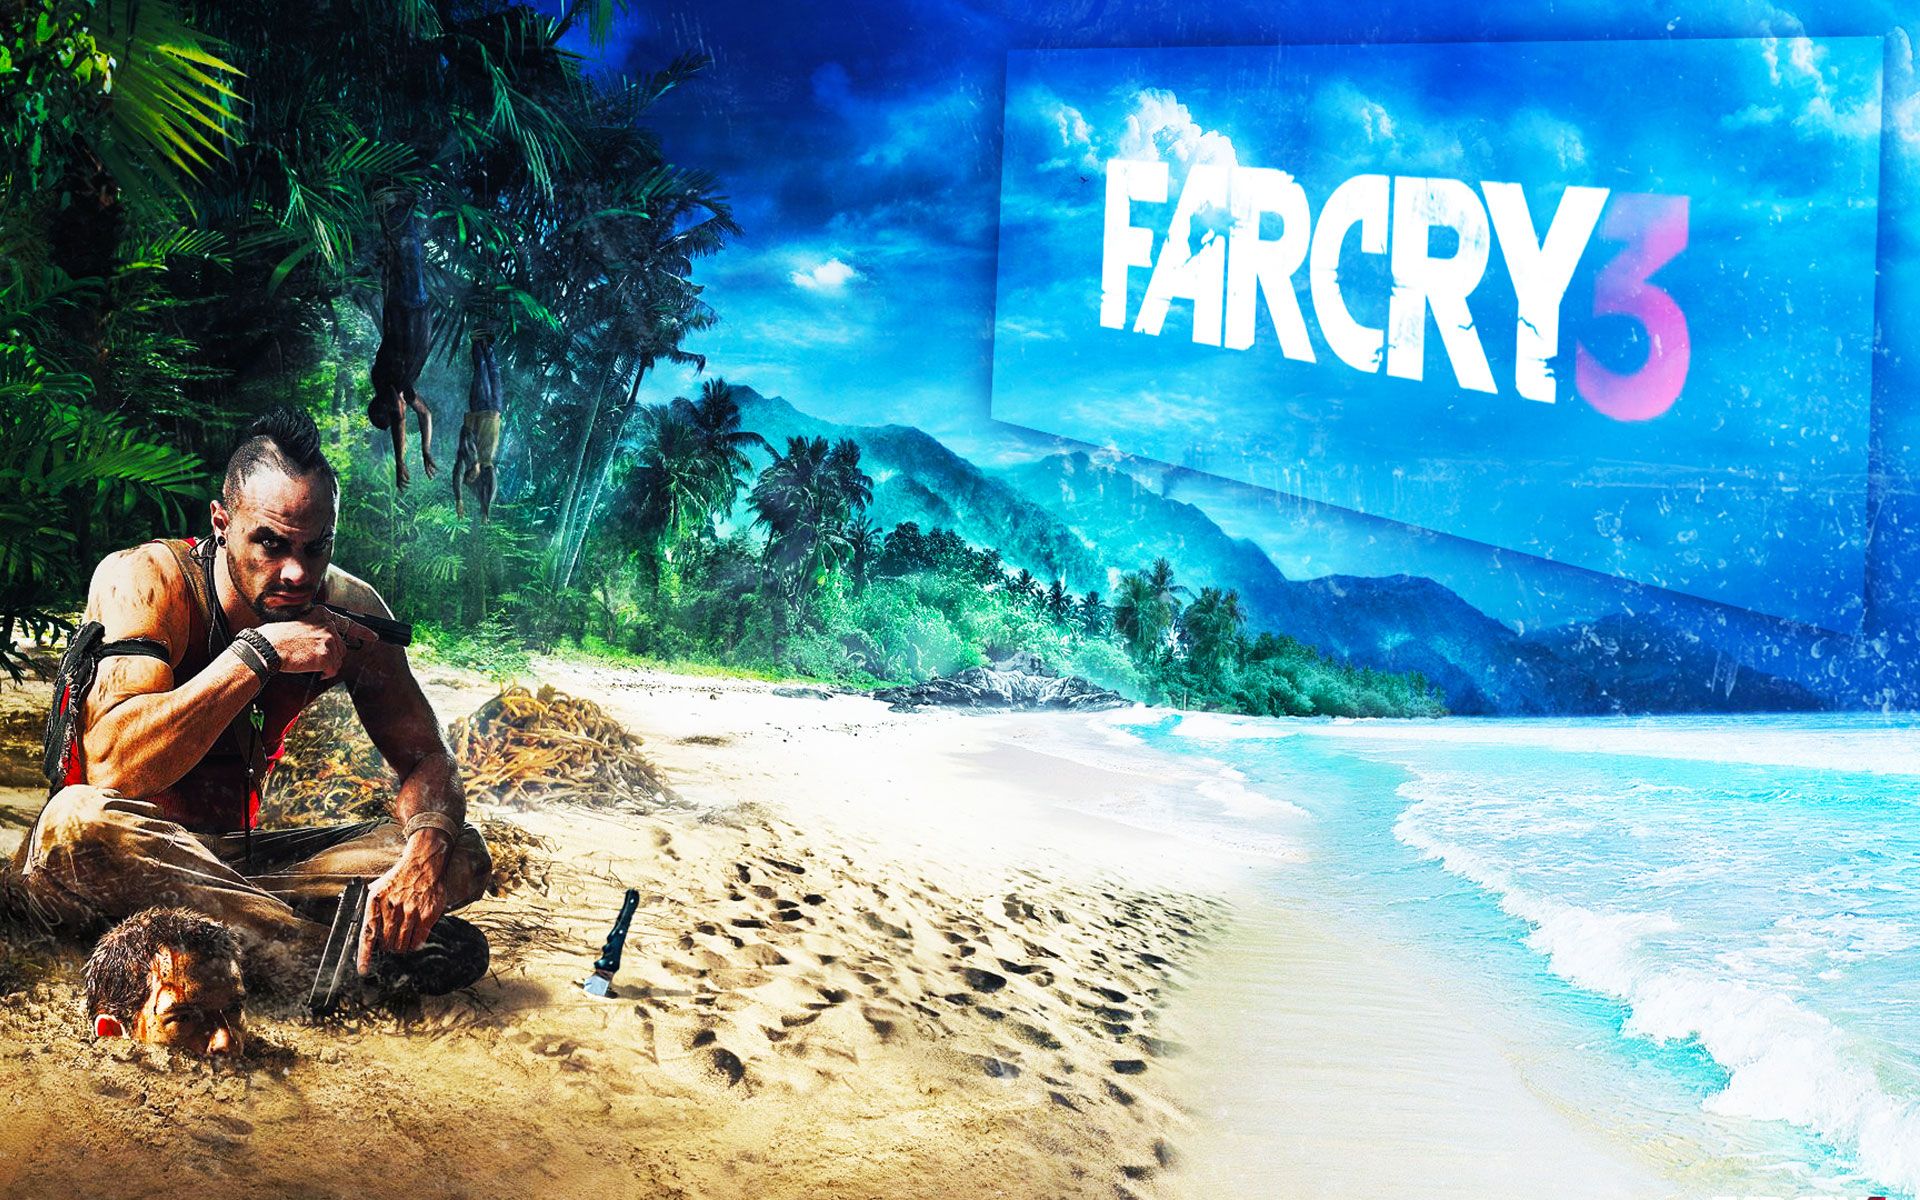 New 3XL Far Cry 3 Images Showcase Slicing And Dicing